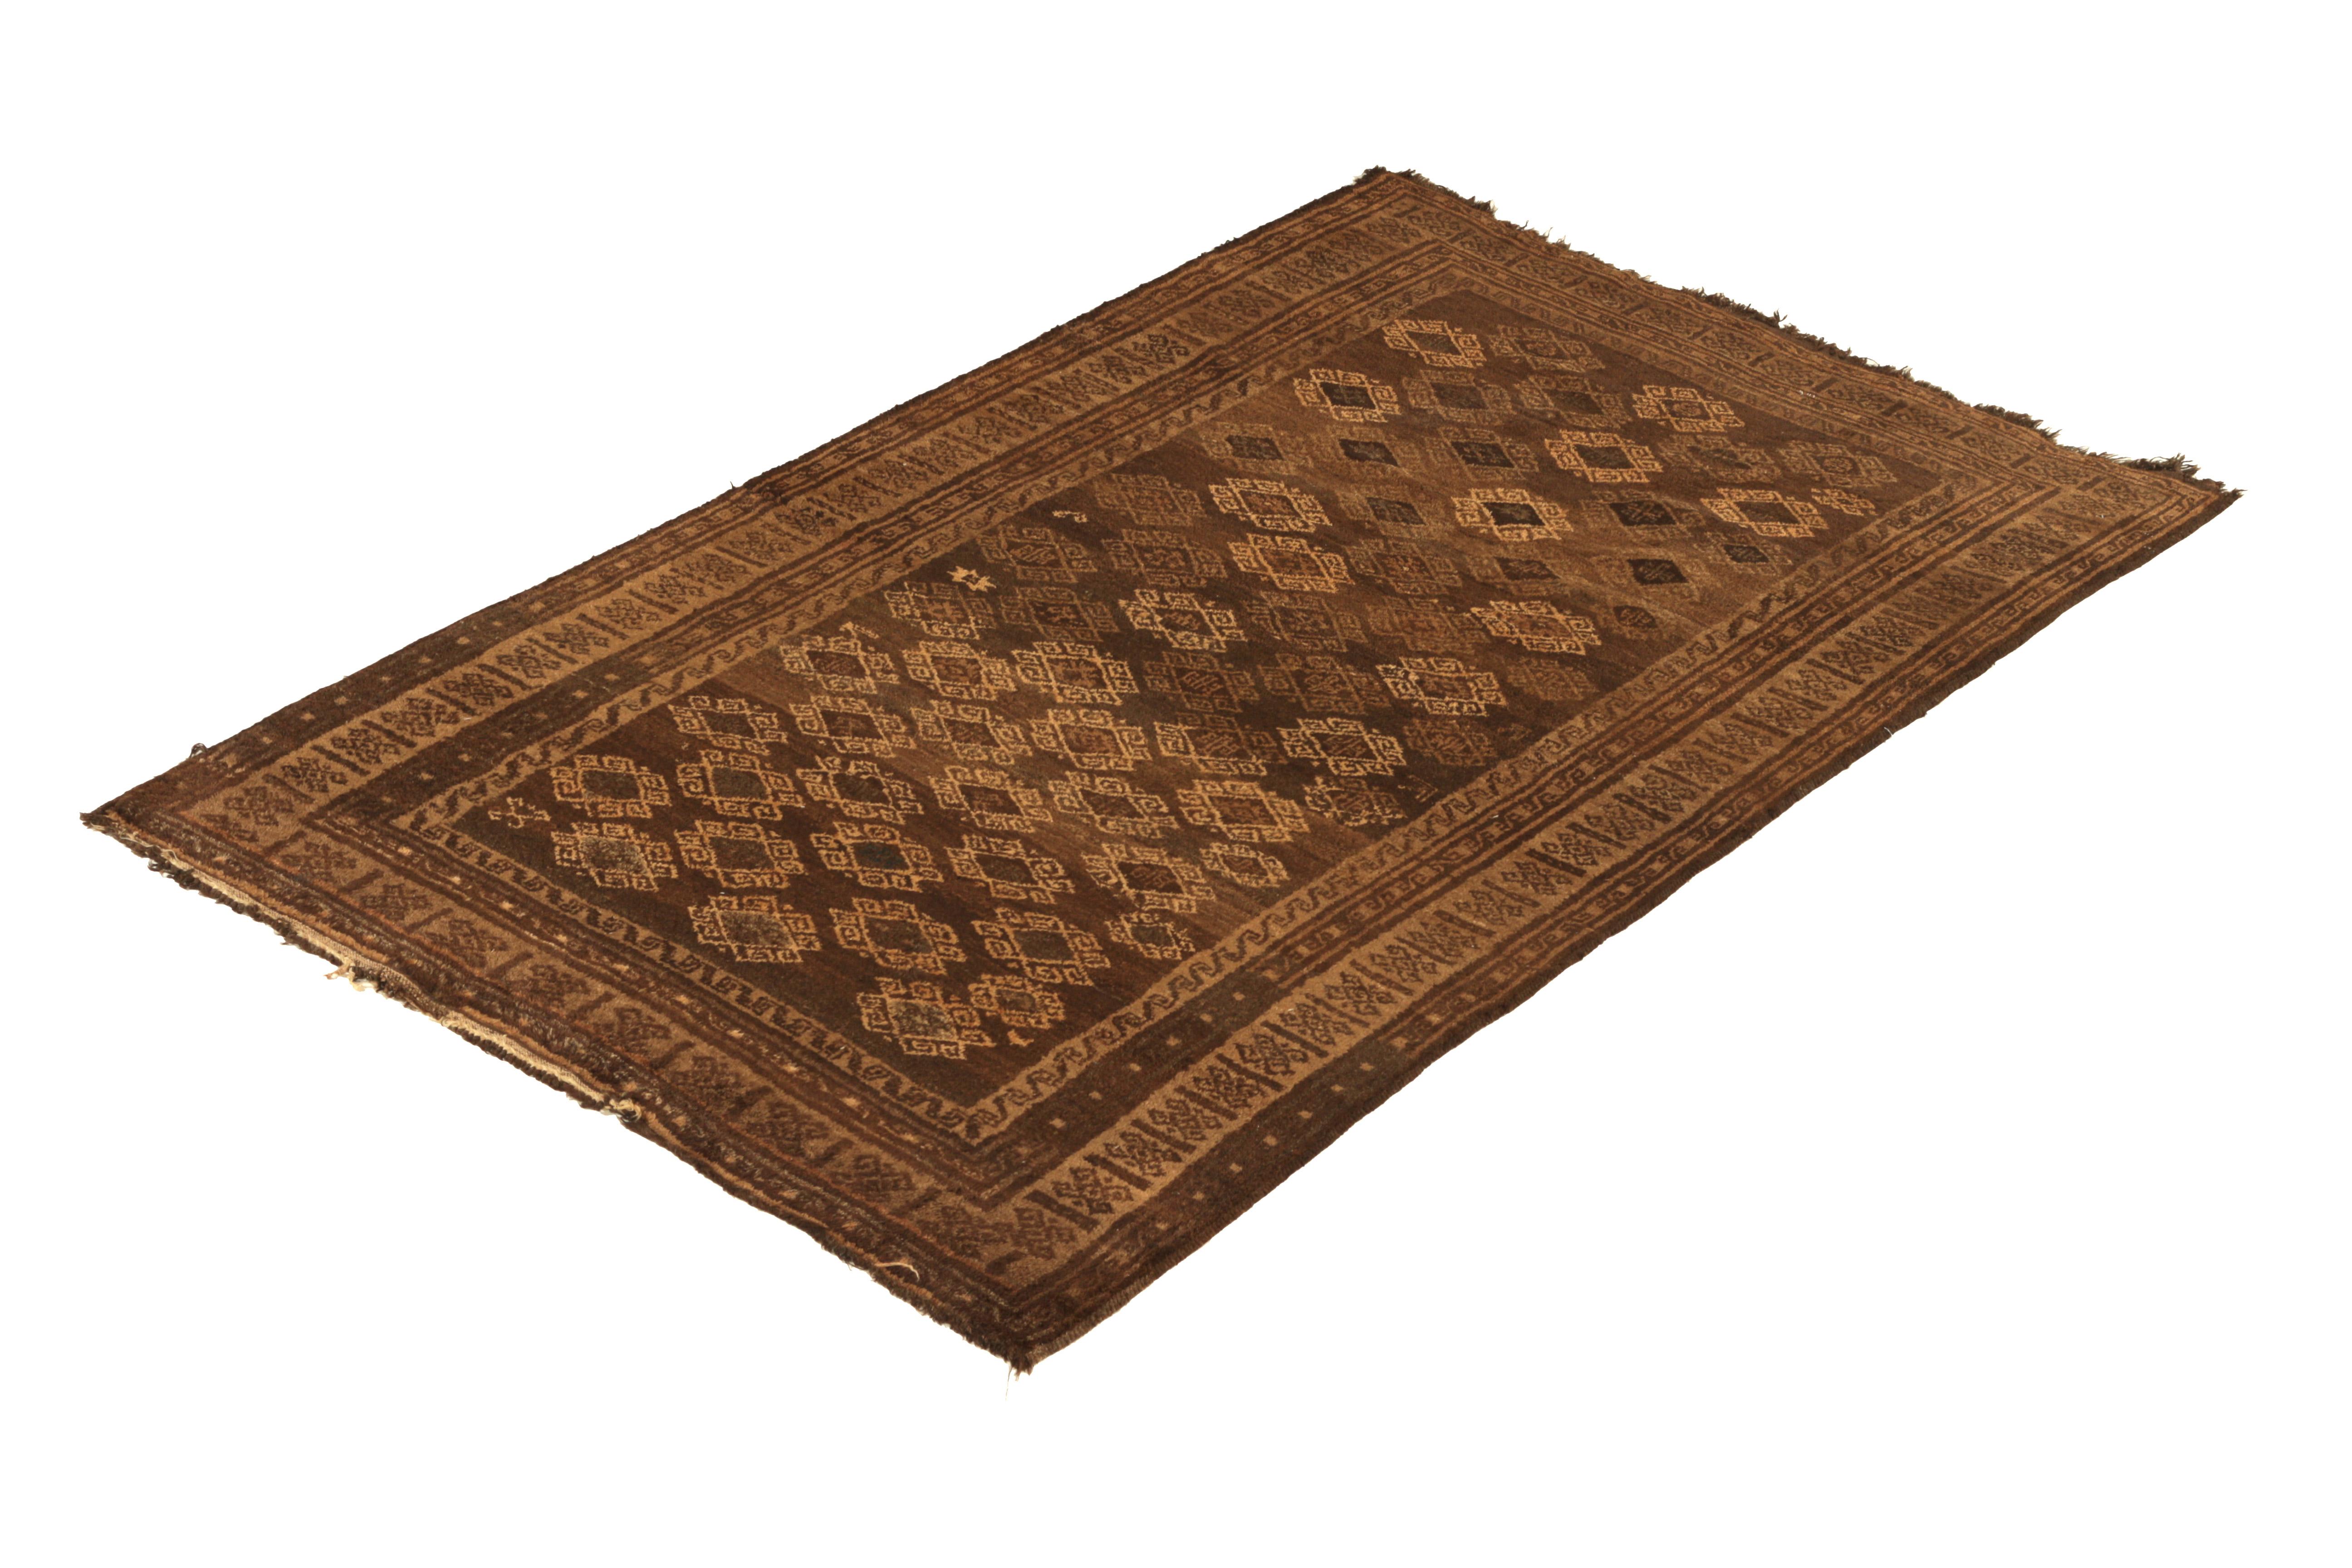 Hand knotted in wool originating from Persia circa 1950-1960, this vintage rug connotes a midcentury Baluch tribal rug design, marrying the Classic richness of beige-brown hues with the equally celebrated variations of ram’s horn motifs in the